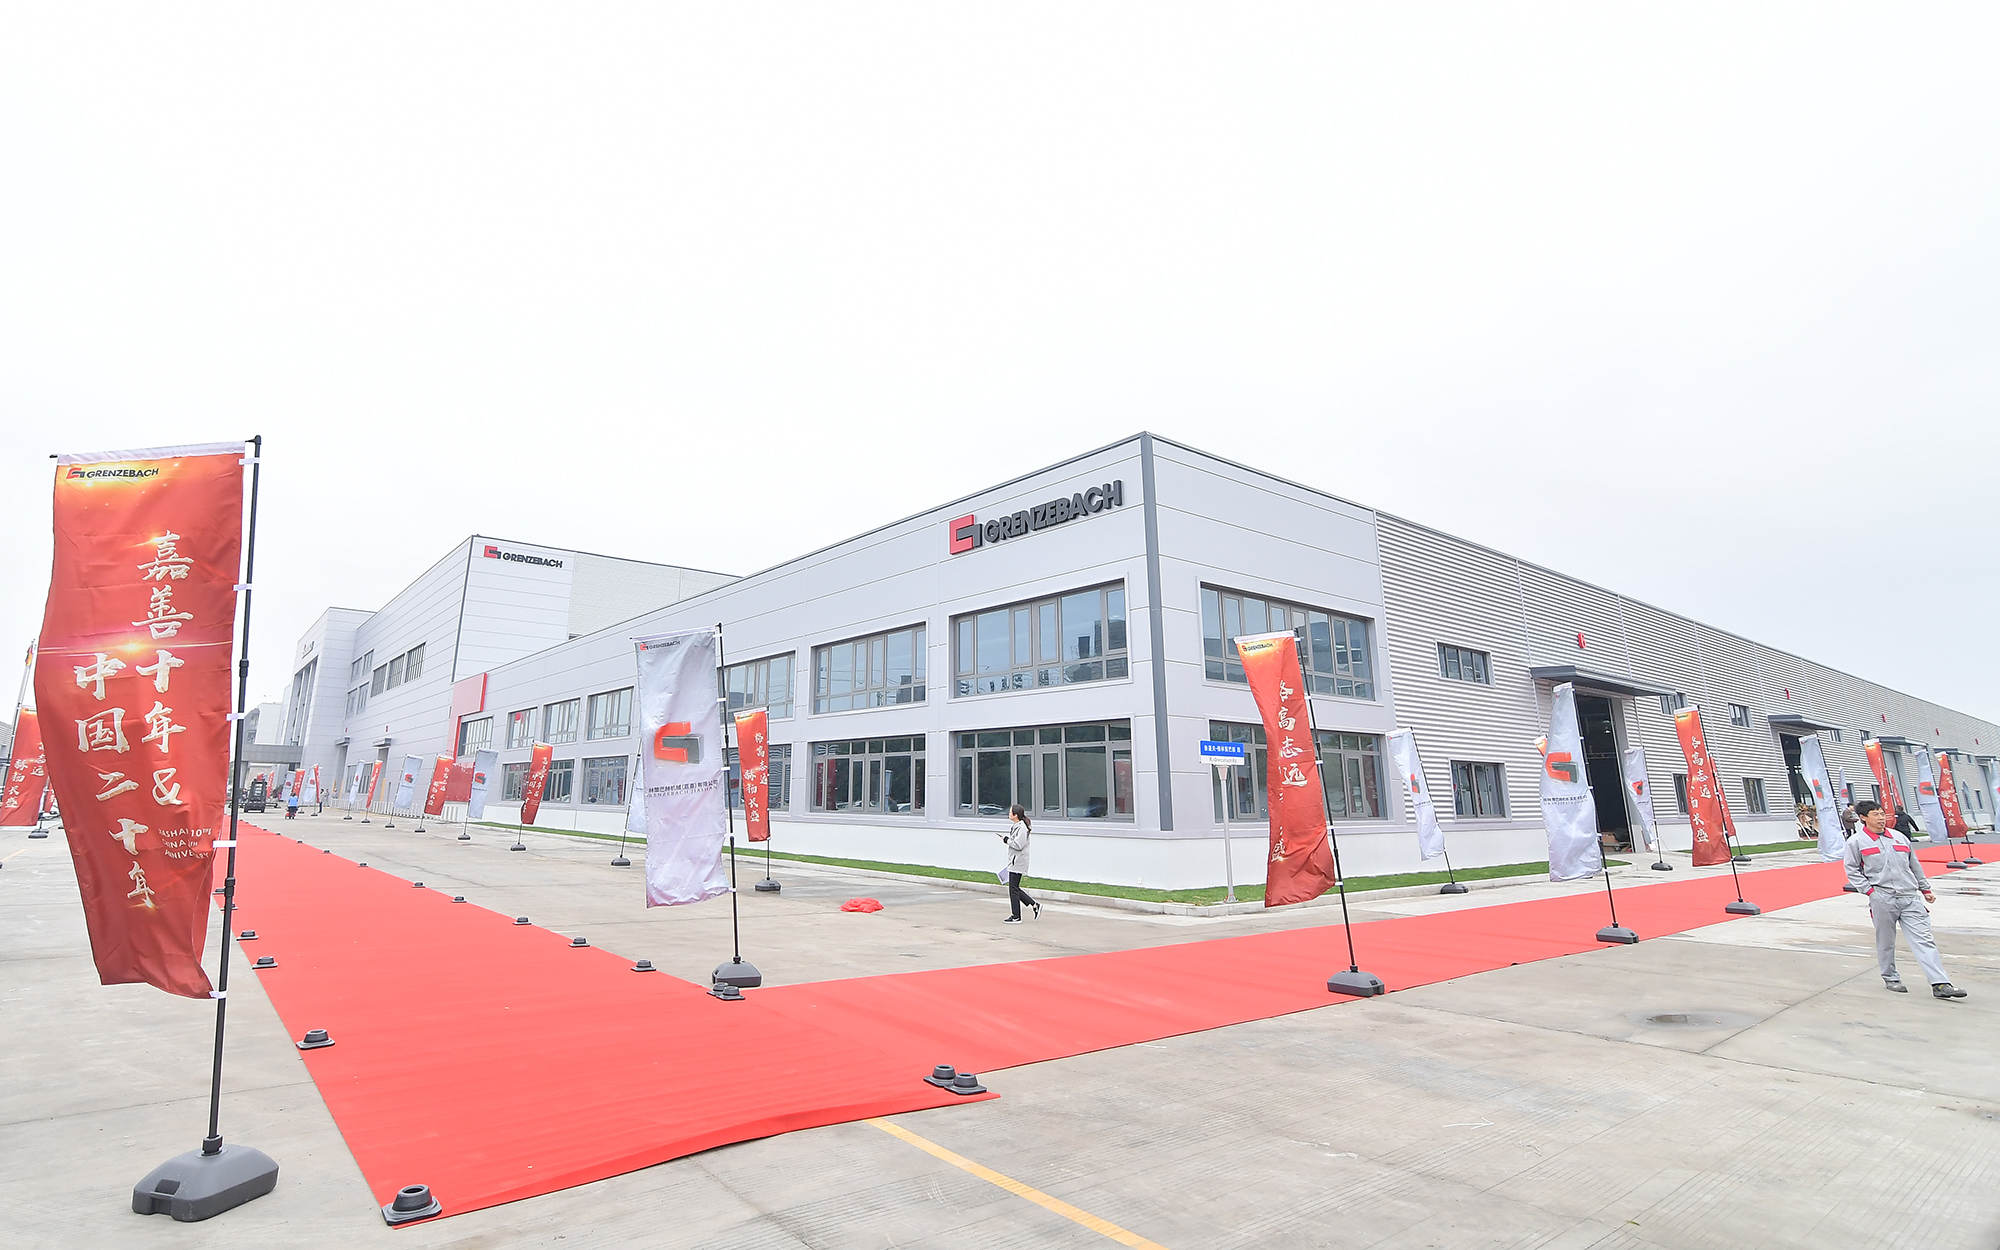 The company premises cover 50,000 square meters